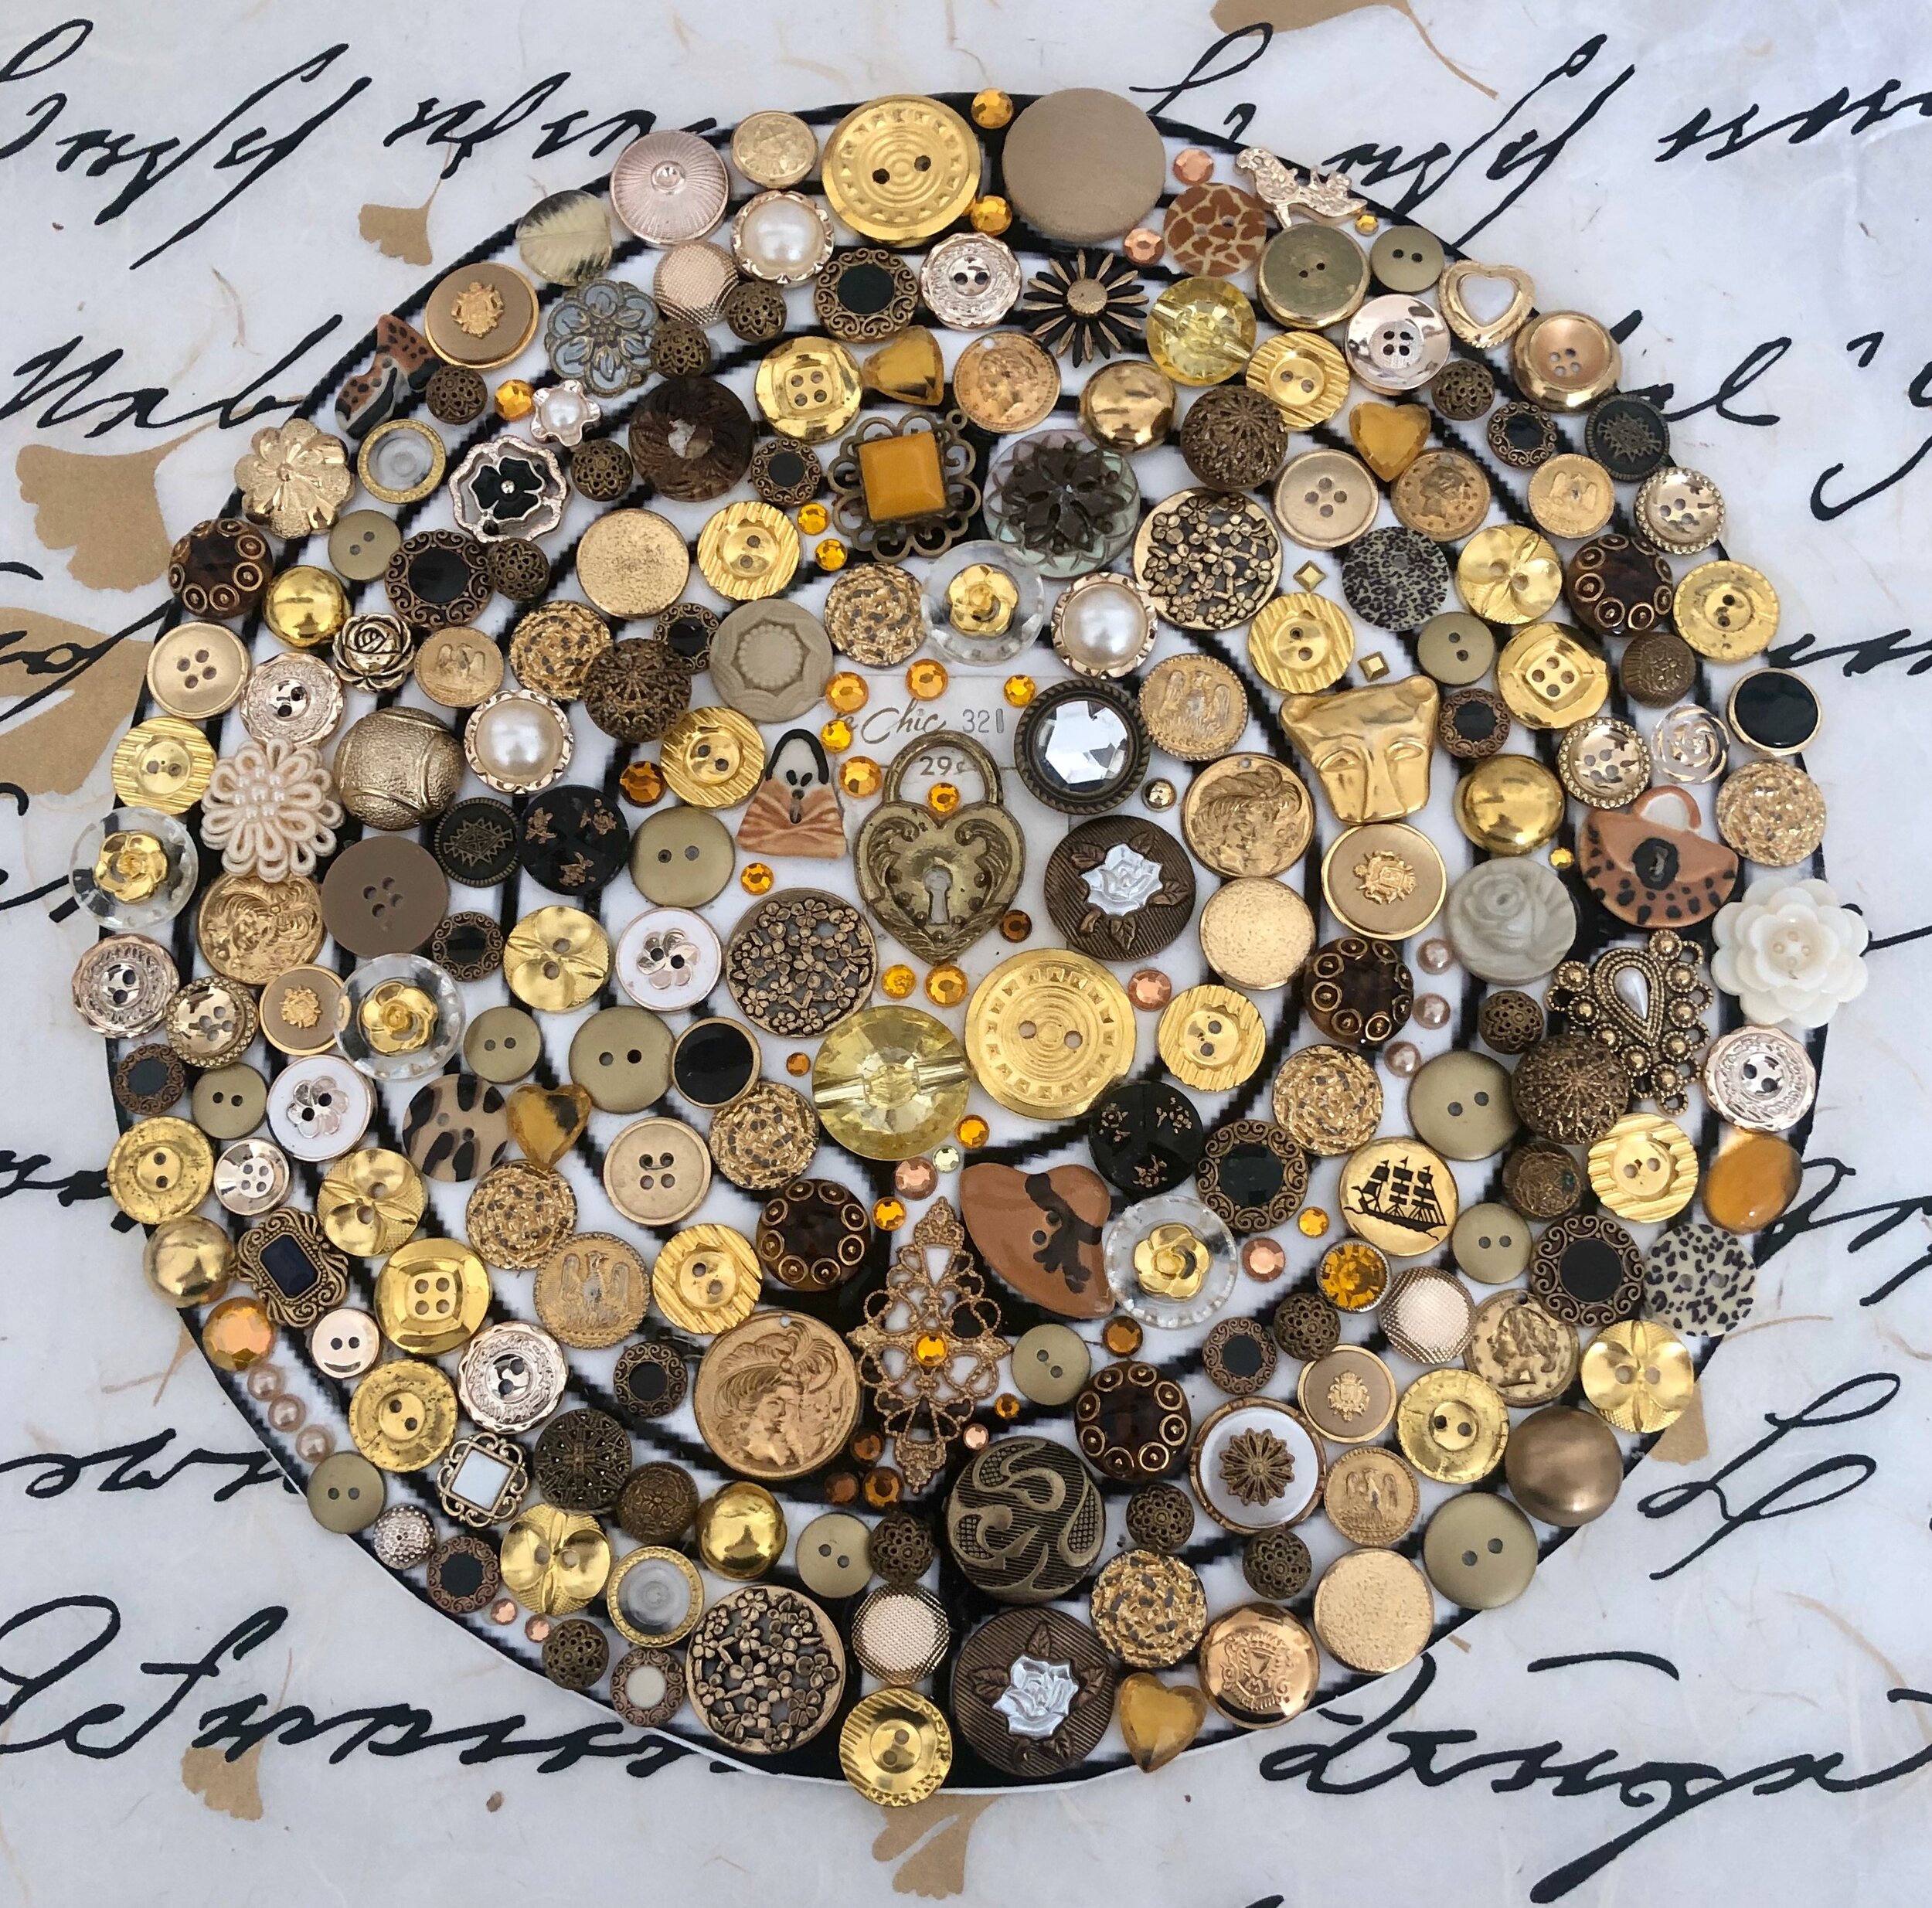 Labyrinth 9  Vintage and new buttons; vintage and new embellishments   2019